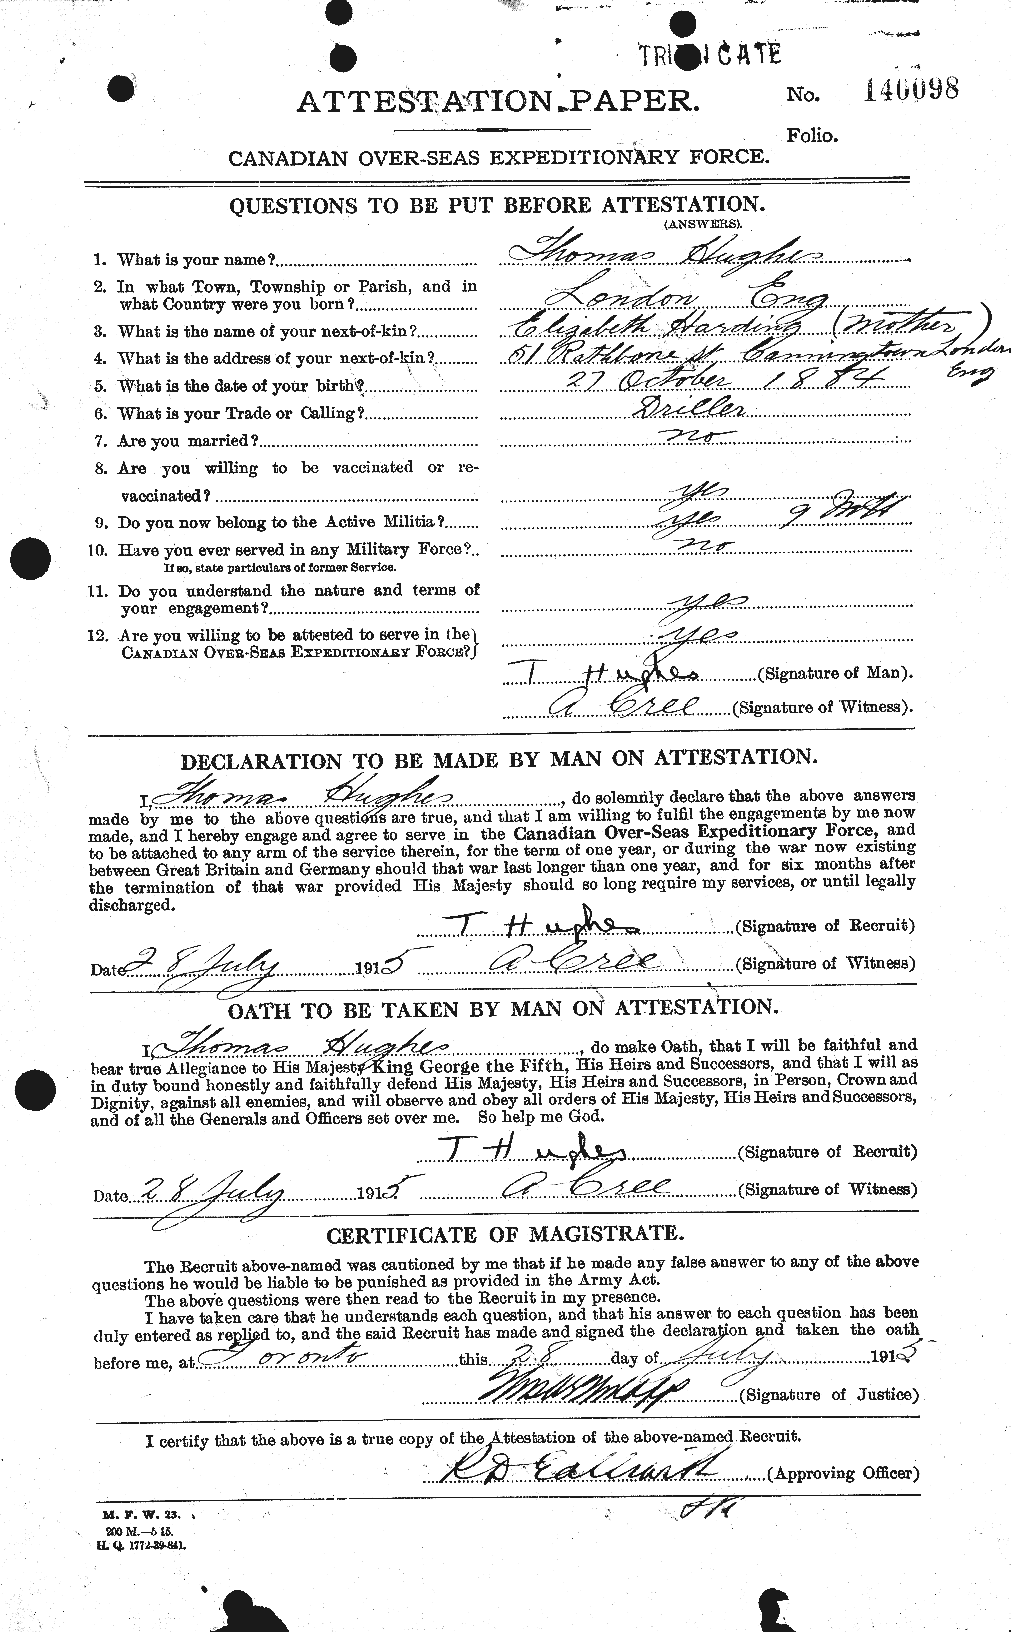 Personnel Records of the First World War - CEF 406674a